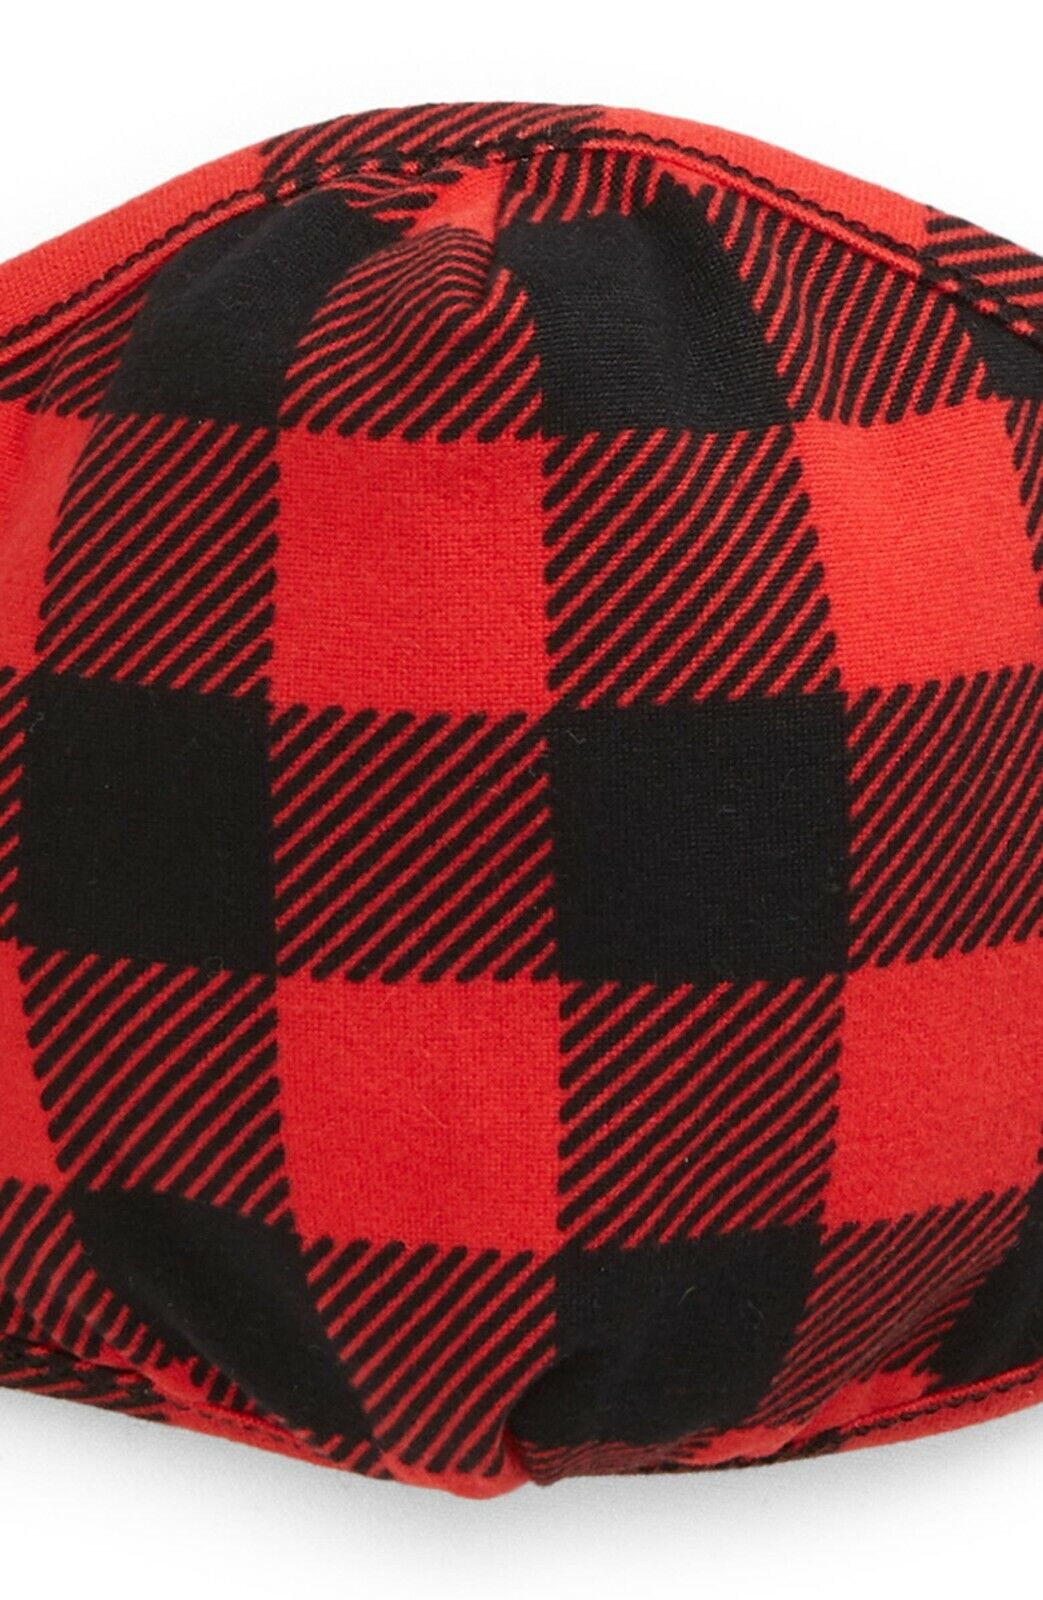 Face Mask Family 4-Pack Buffalo Check Plaid Black Red Washable Soft Cotton